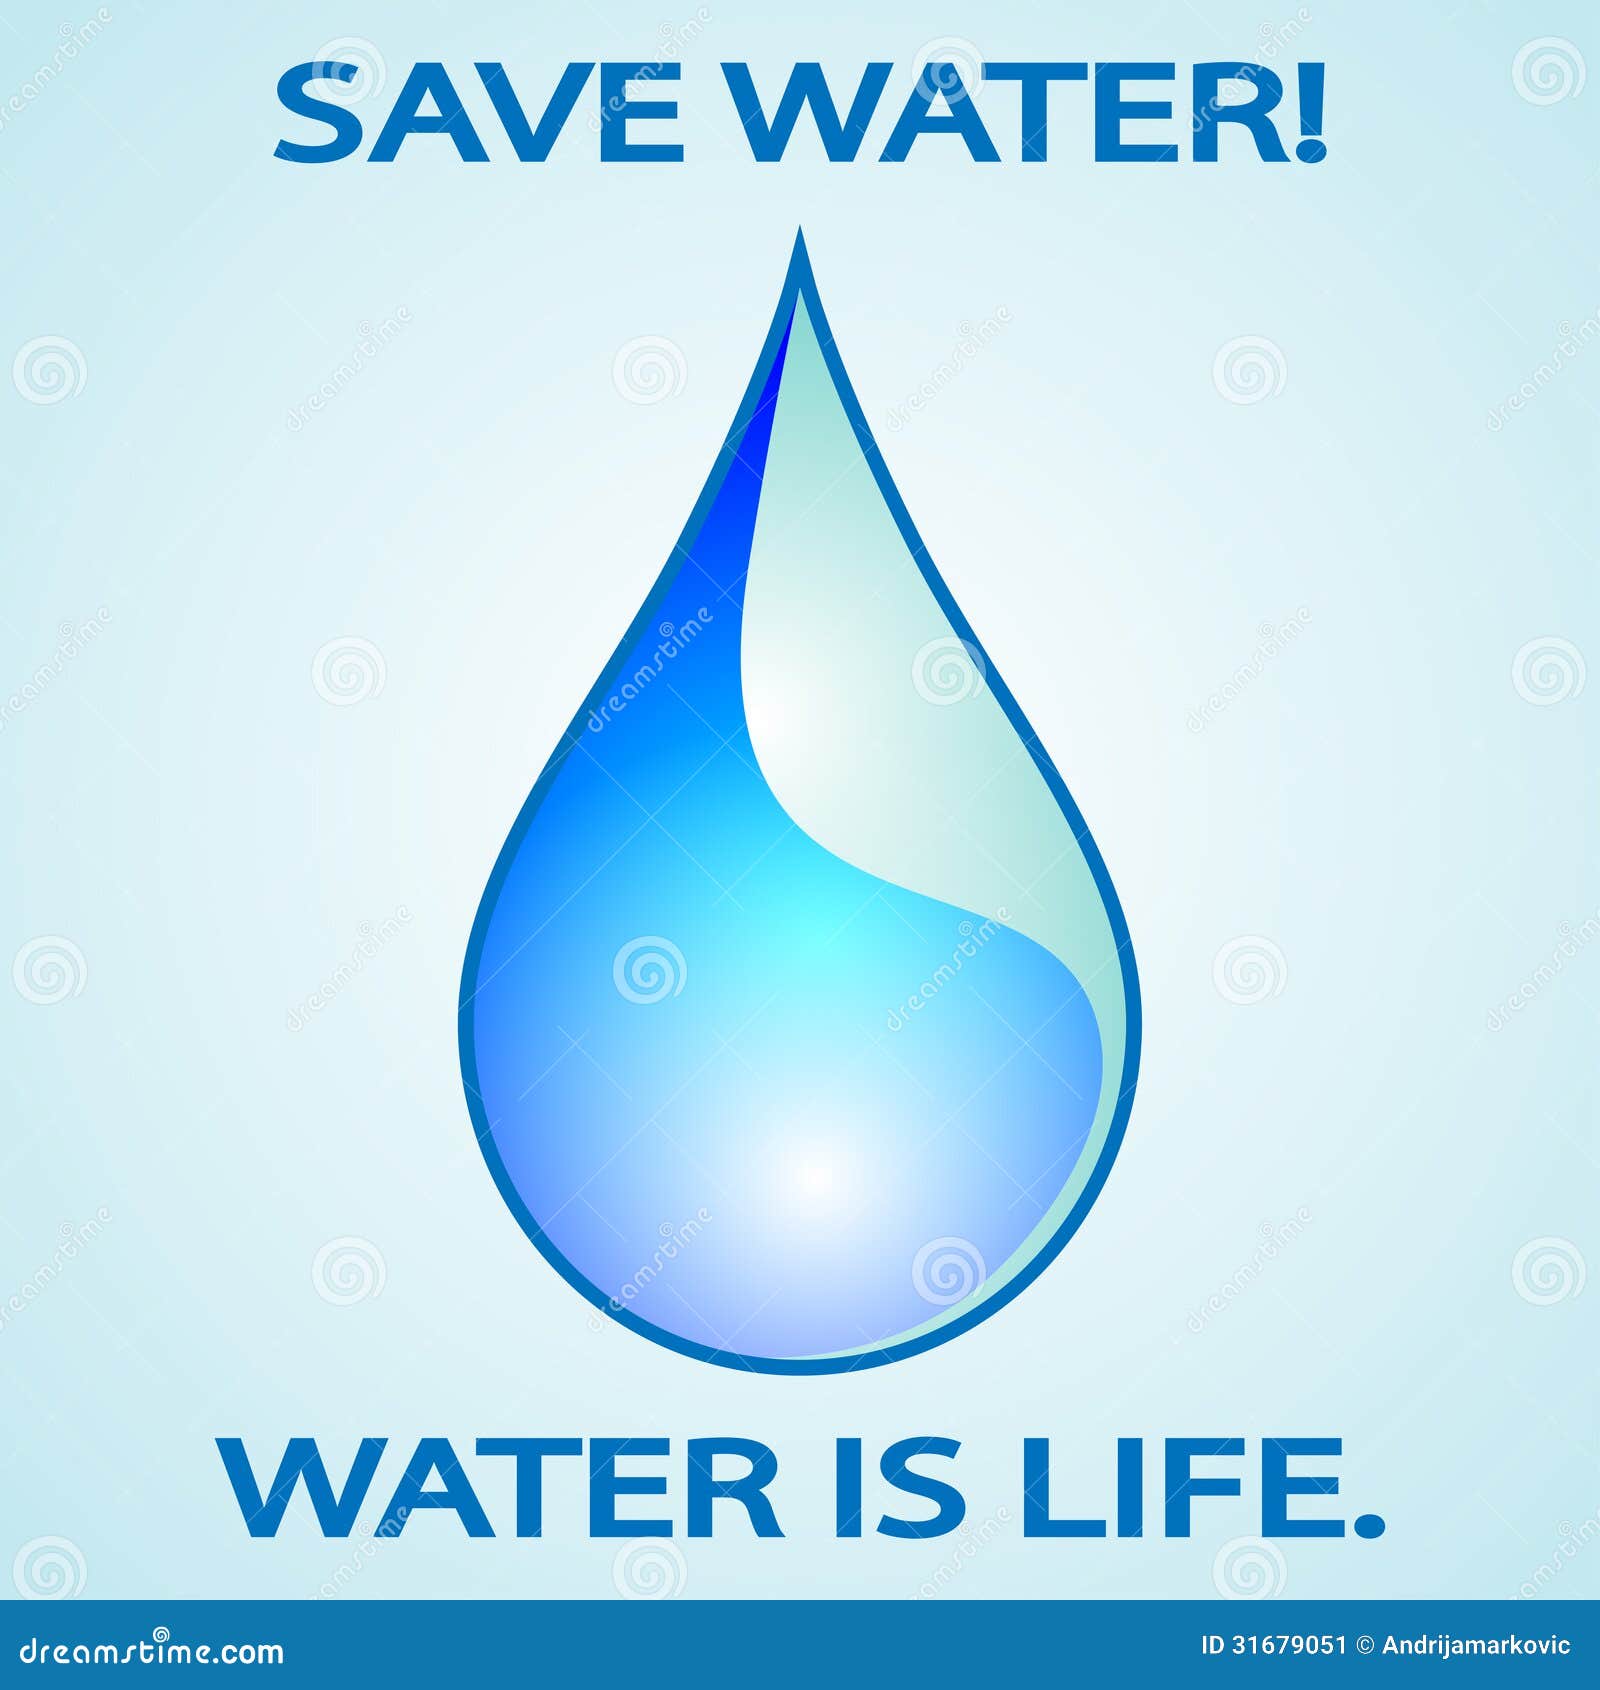 Water Conservation Resources - Save Every Drop!